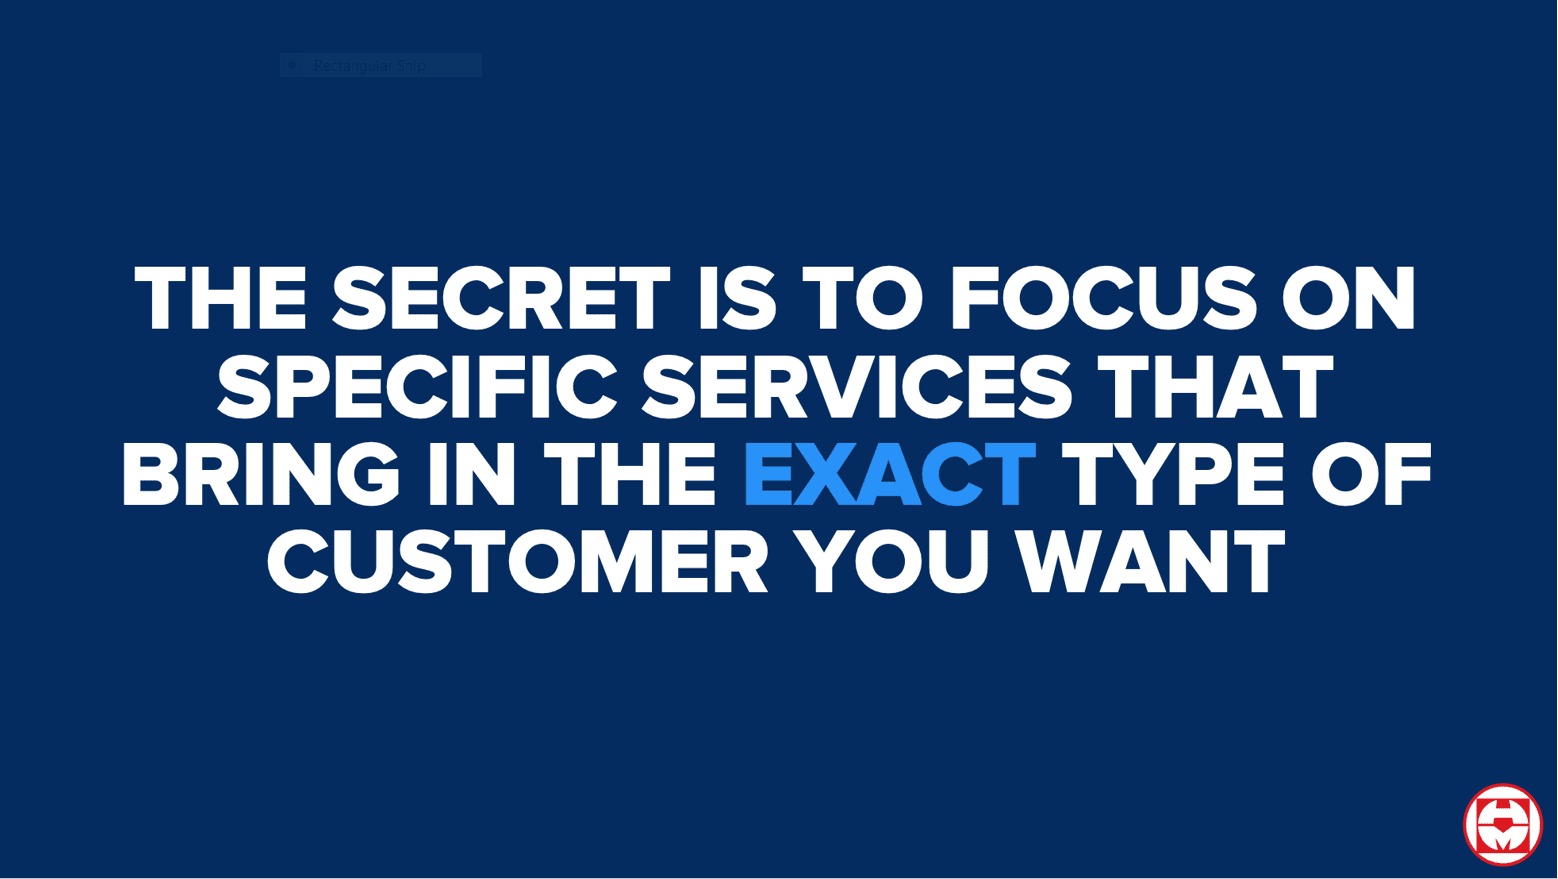 The secret is to focus on specific services that bring the exact customer you want